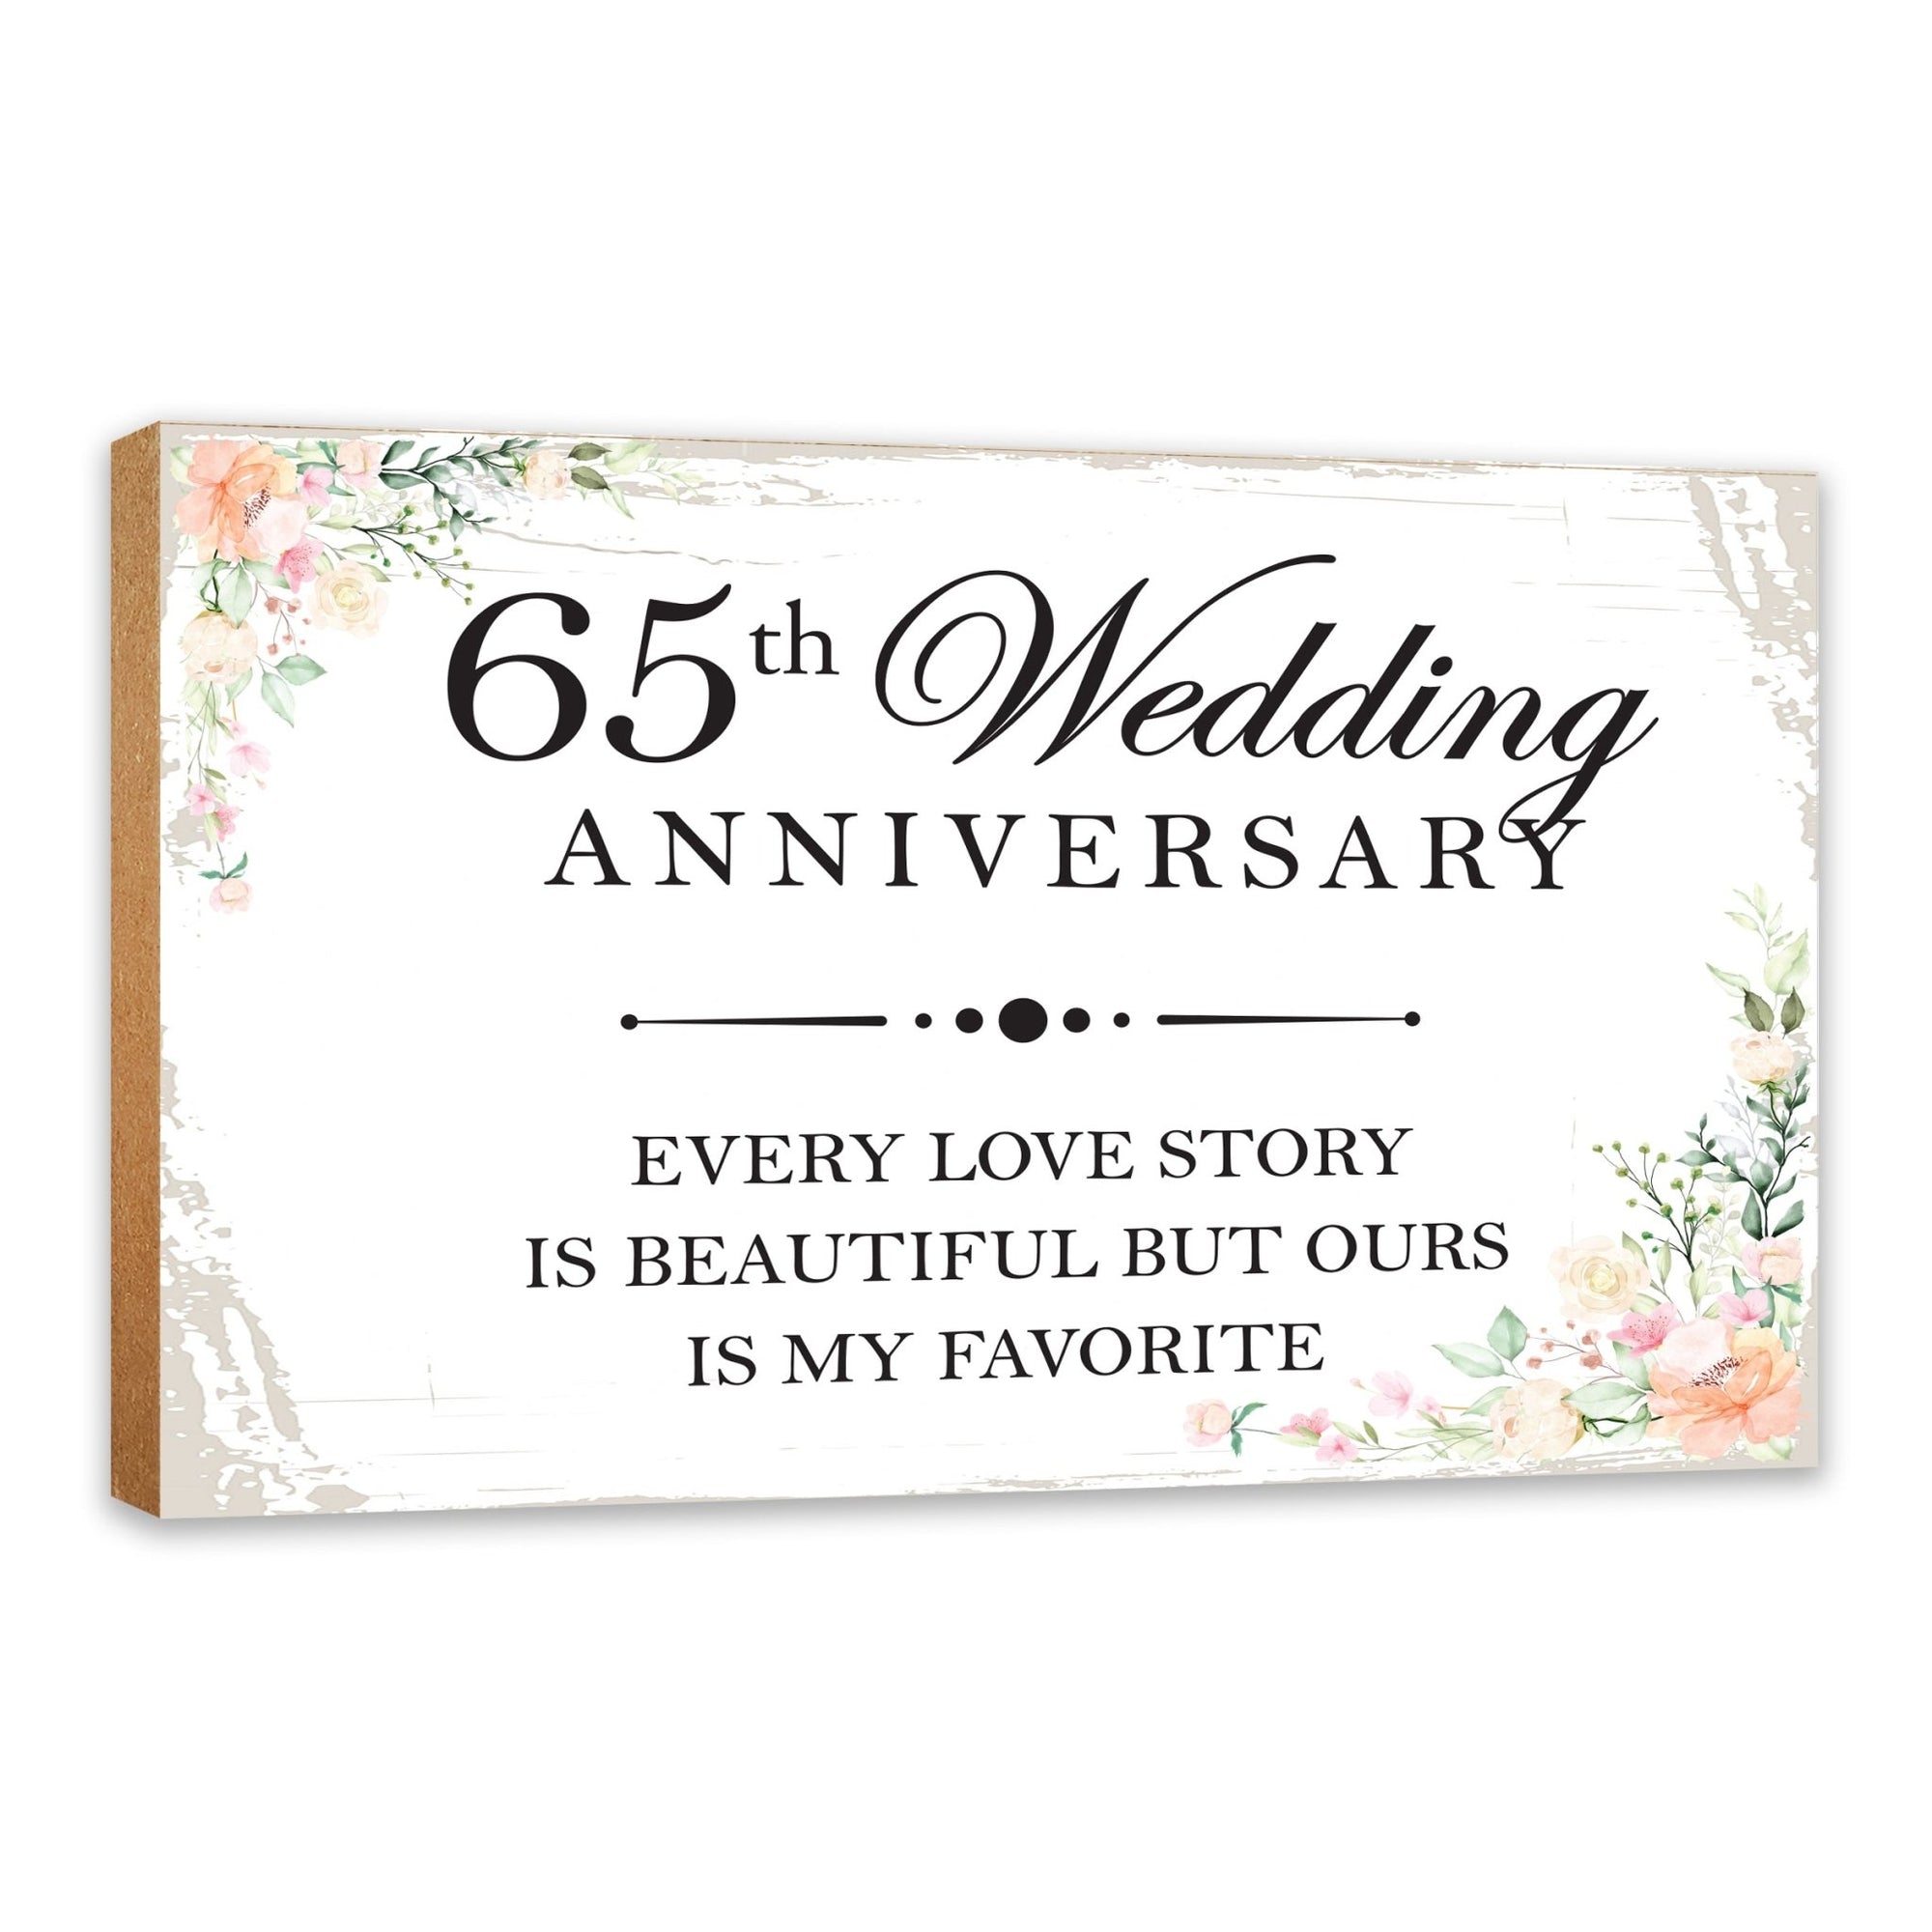 65th Wedding Anniversary Unique Shelf Decor and Tabletop Signs Gift for Couples - Every Love Story - LifeSong Milestones